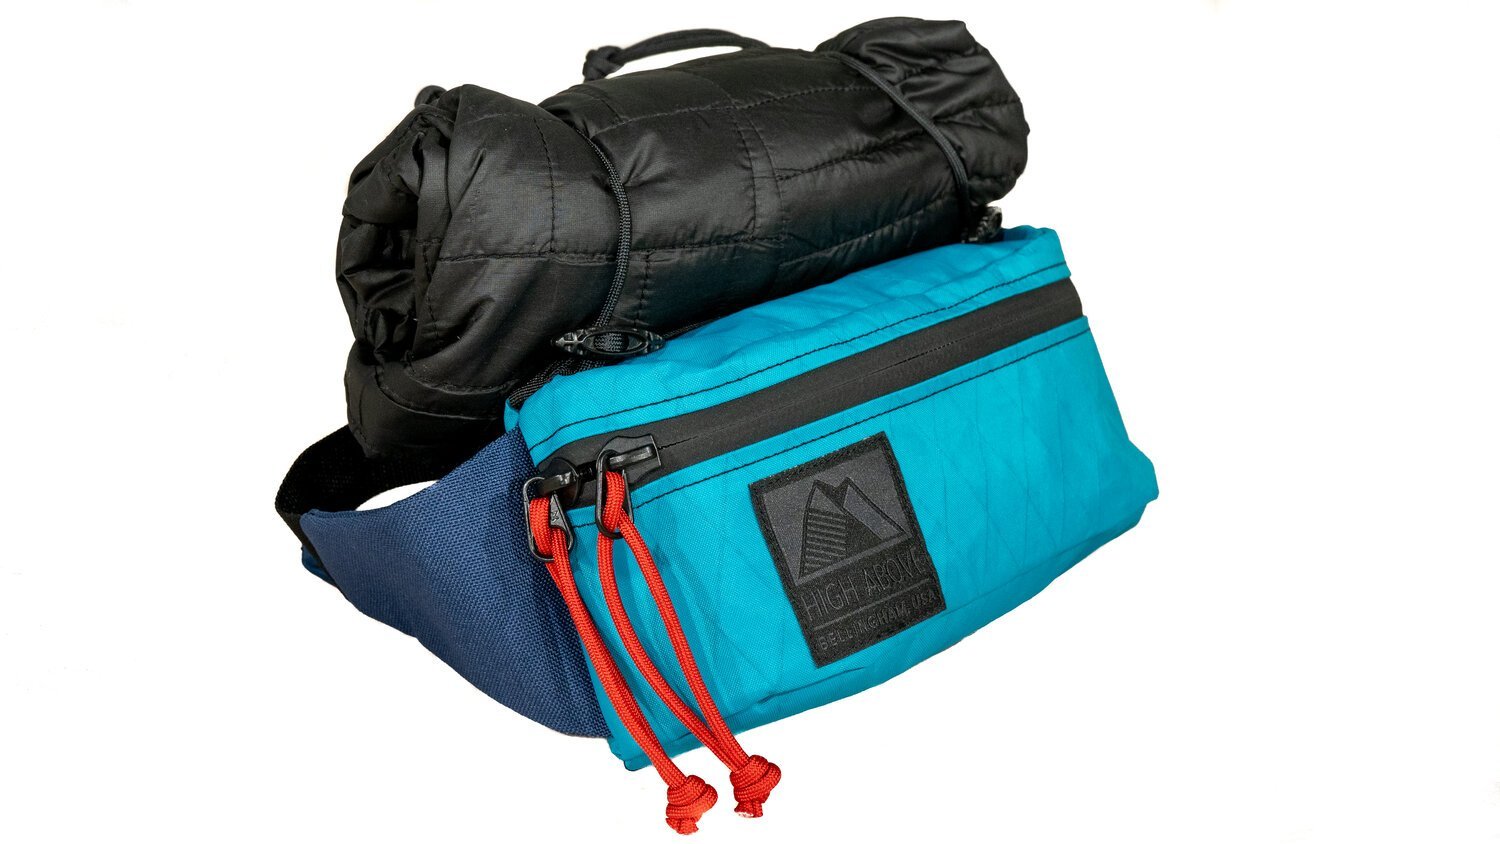 High above radpack in teal with coat attached to it